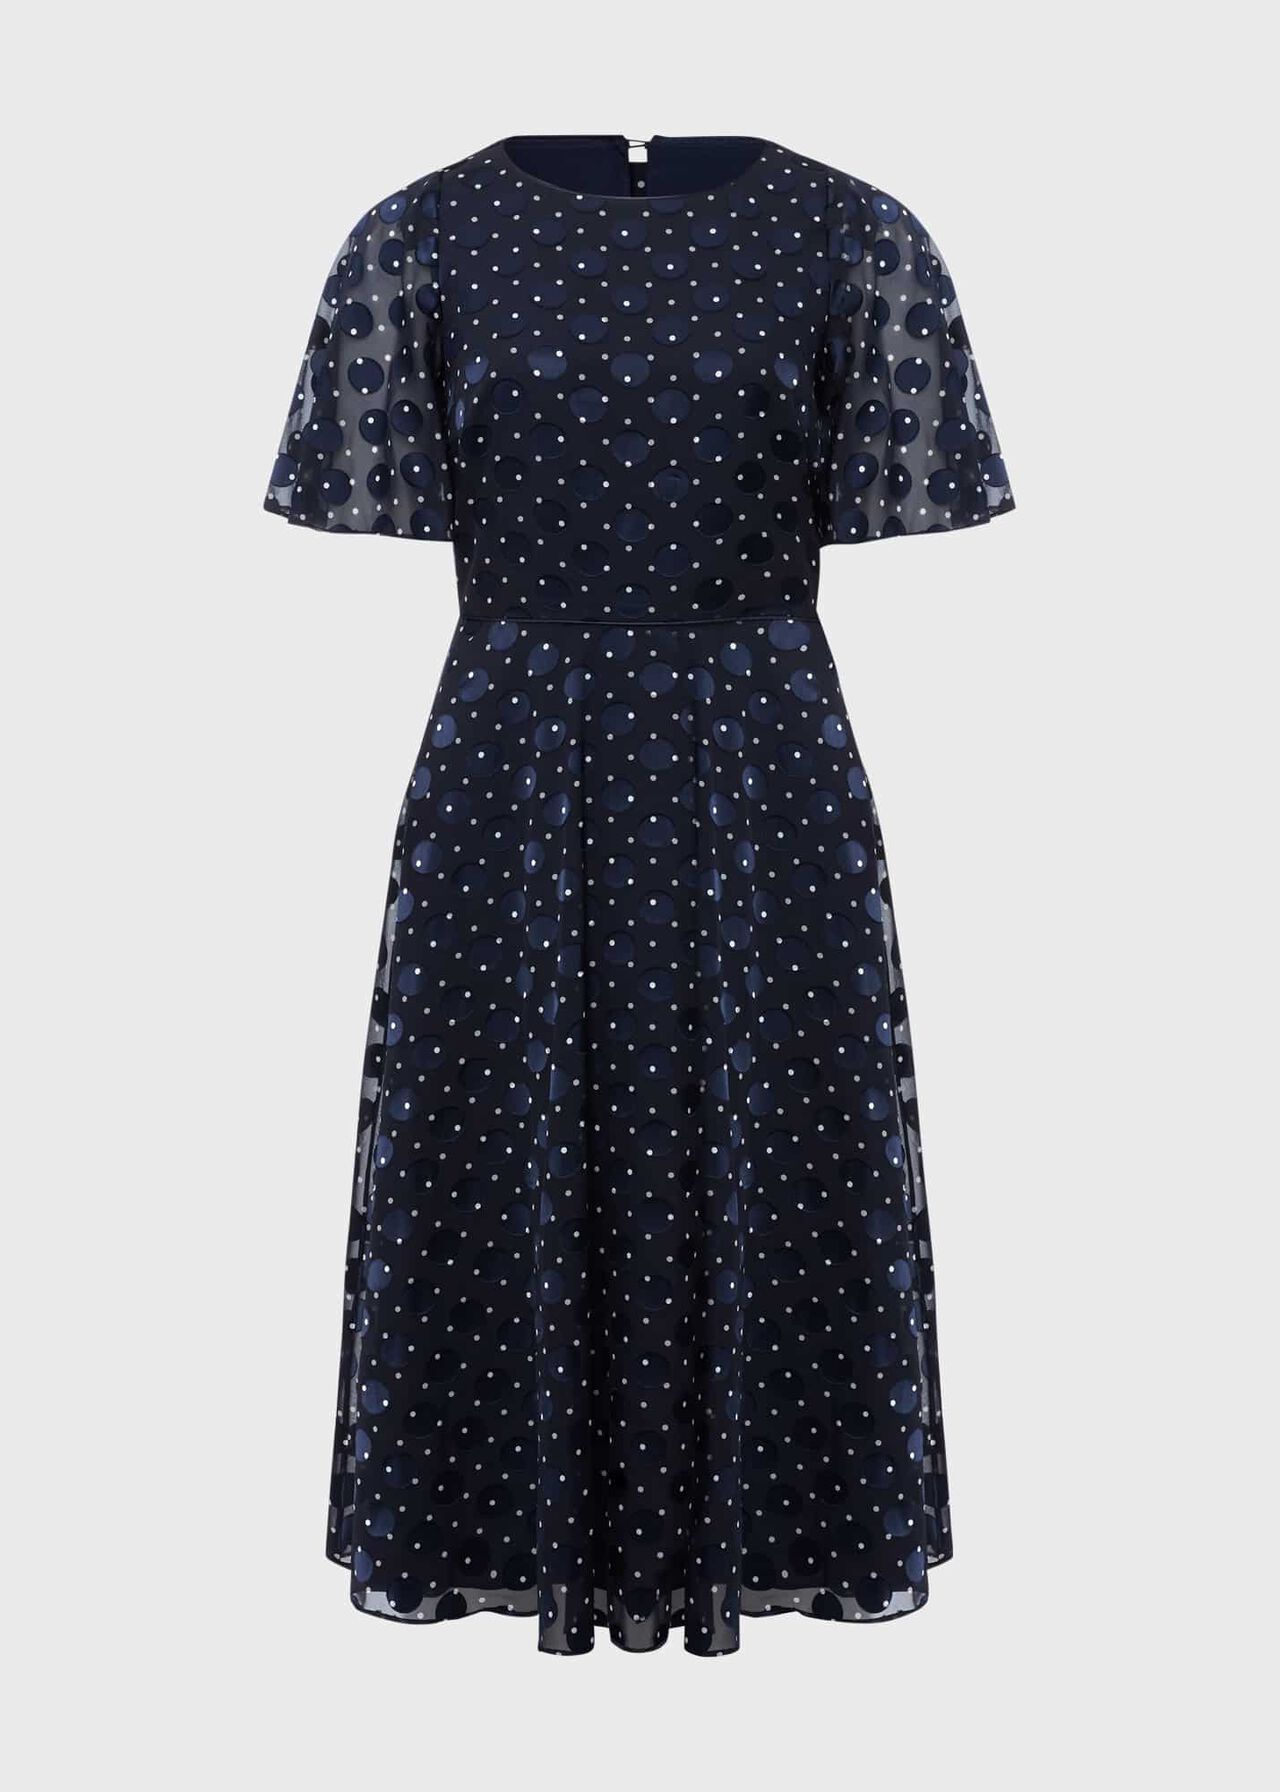 Ceira Spot Fit And Flare Dress, Navy Ivory, hi-res